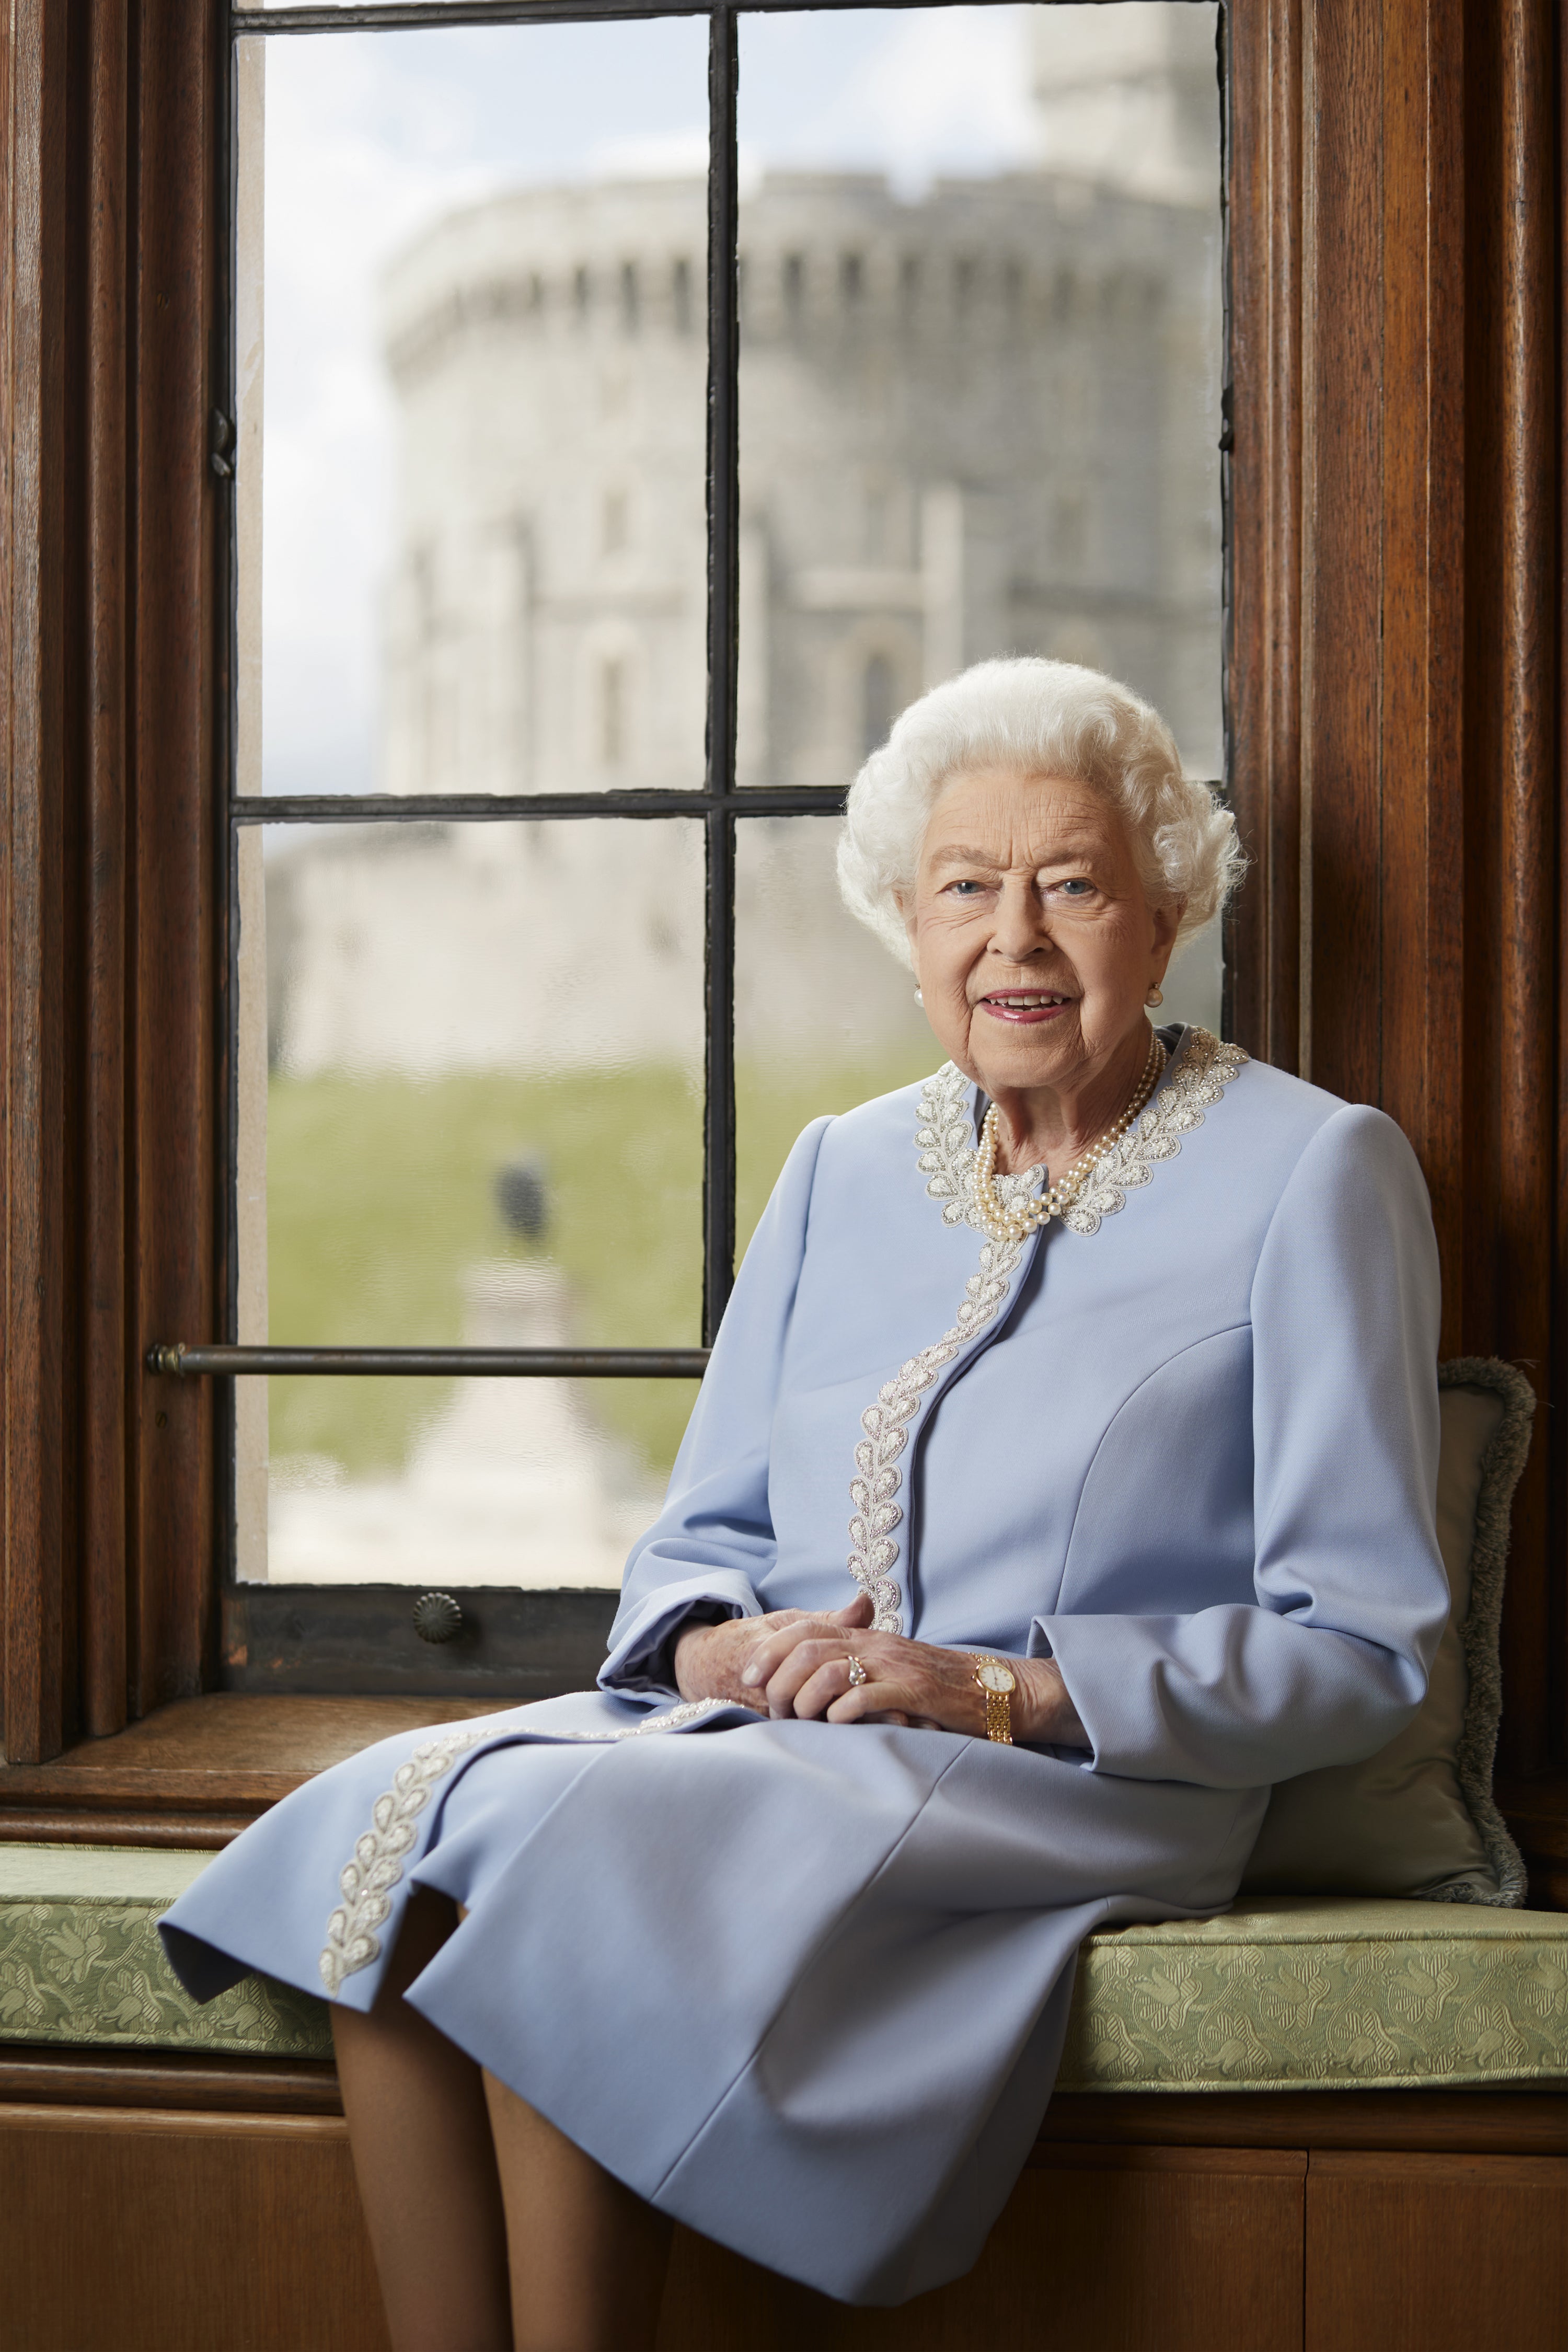 The official Platinum Jubilee portrait of the Queen photographed at Windsor Castle by Ranald Mackechnie (Royal Household/Ranald Mackechnie/PA)